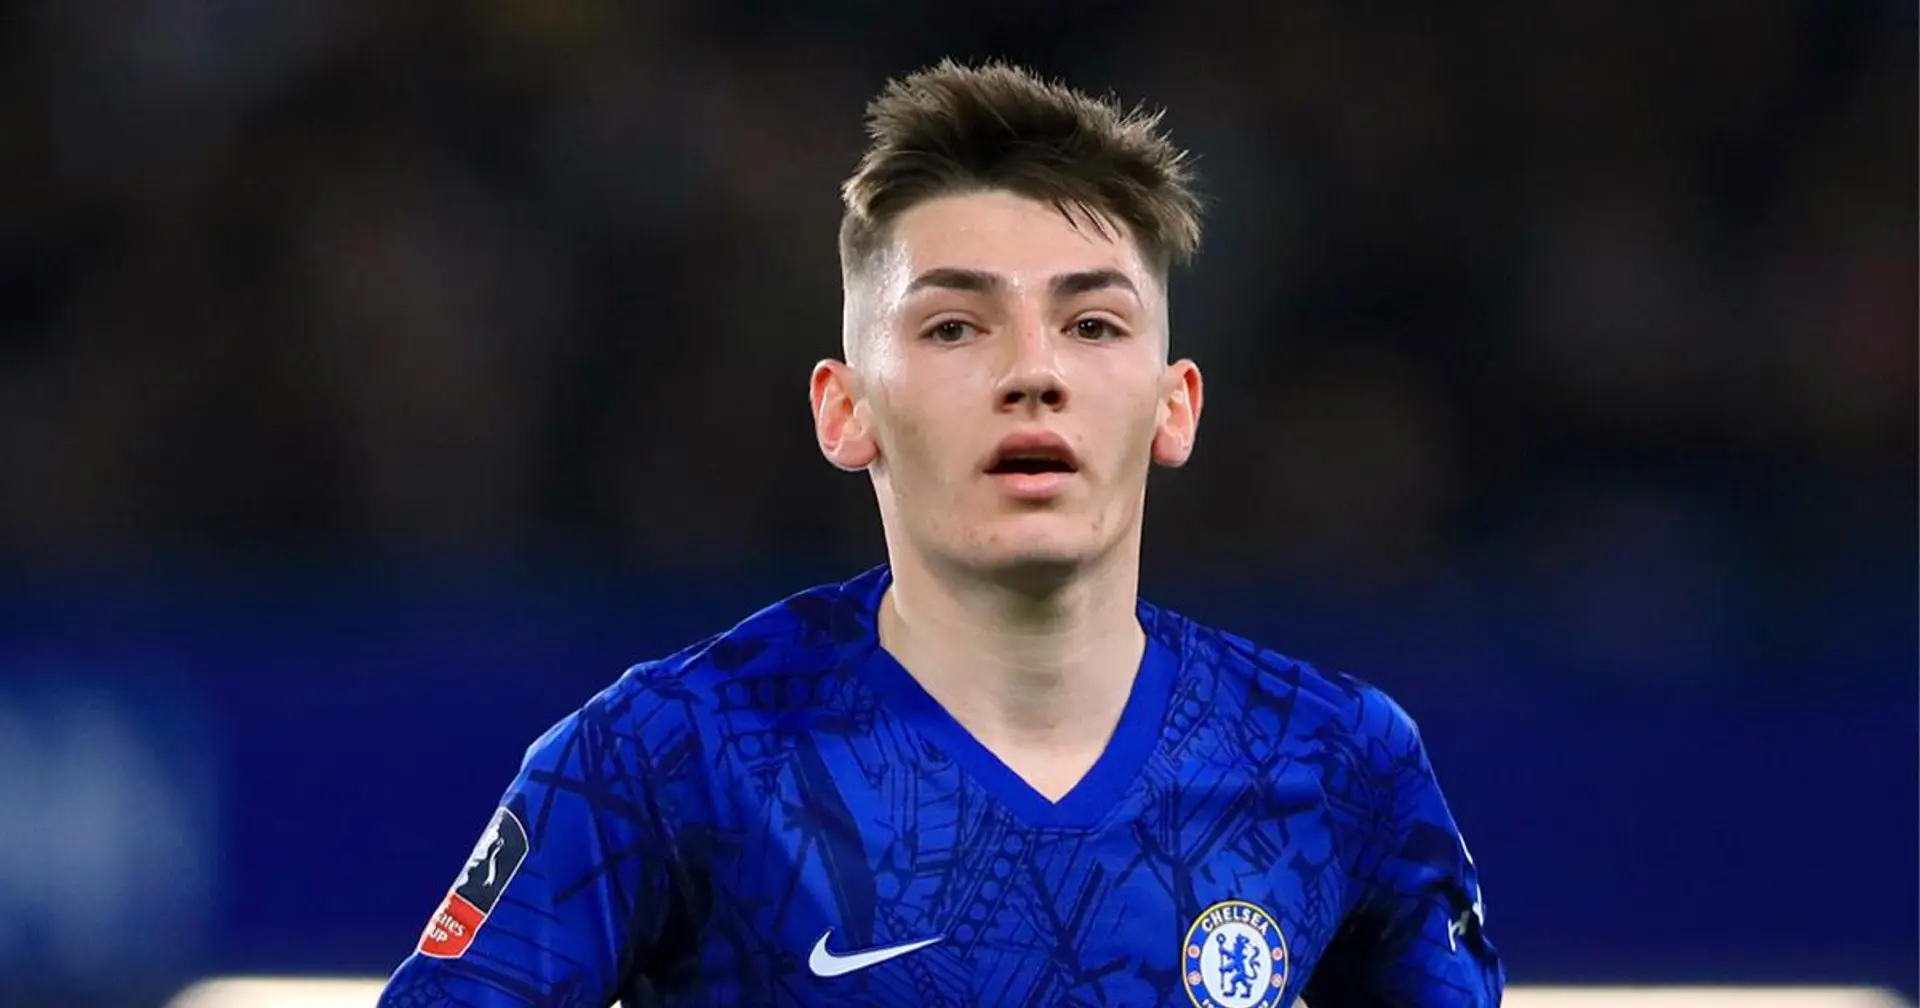 Rangers eye Billy Gilmour loan deal in January: The Times (reliability: 4 stars)